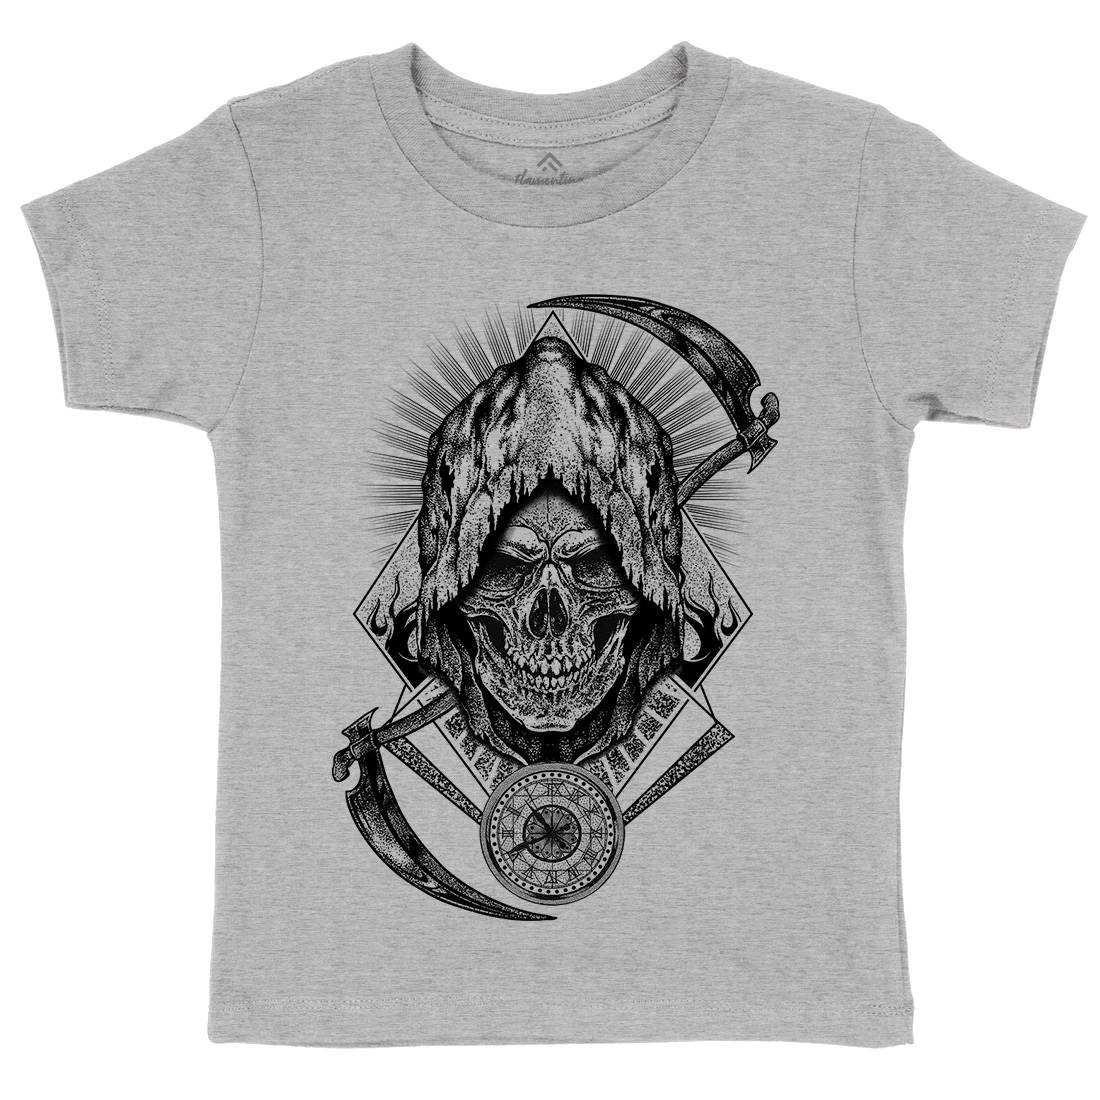 Your Time Has Arrived Kids Crew Neck T-Shirt Horror D099